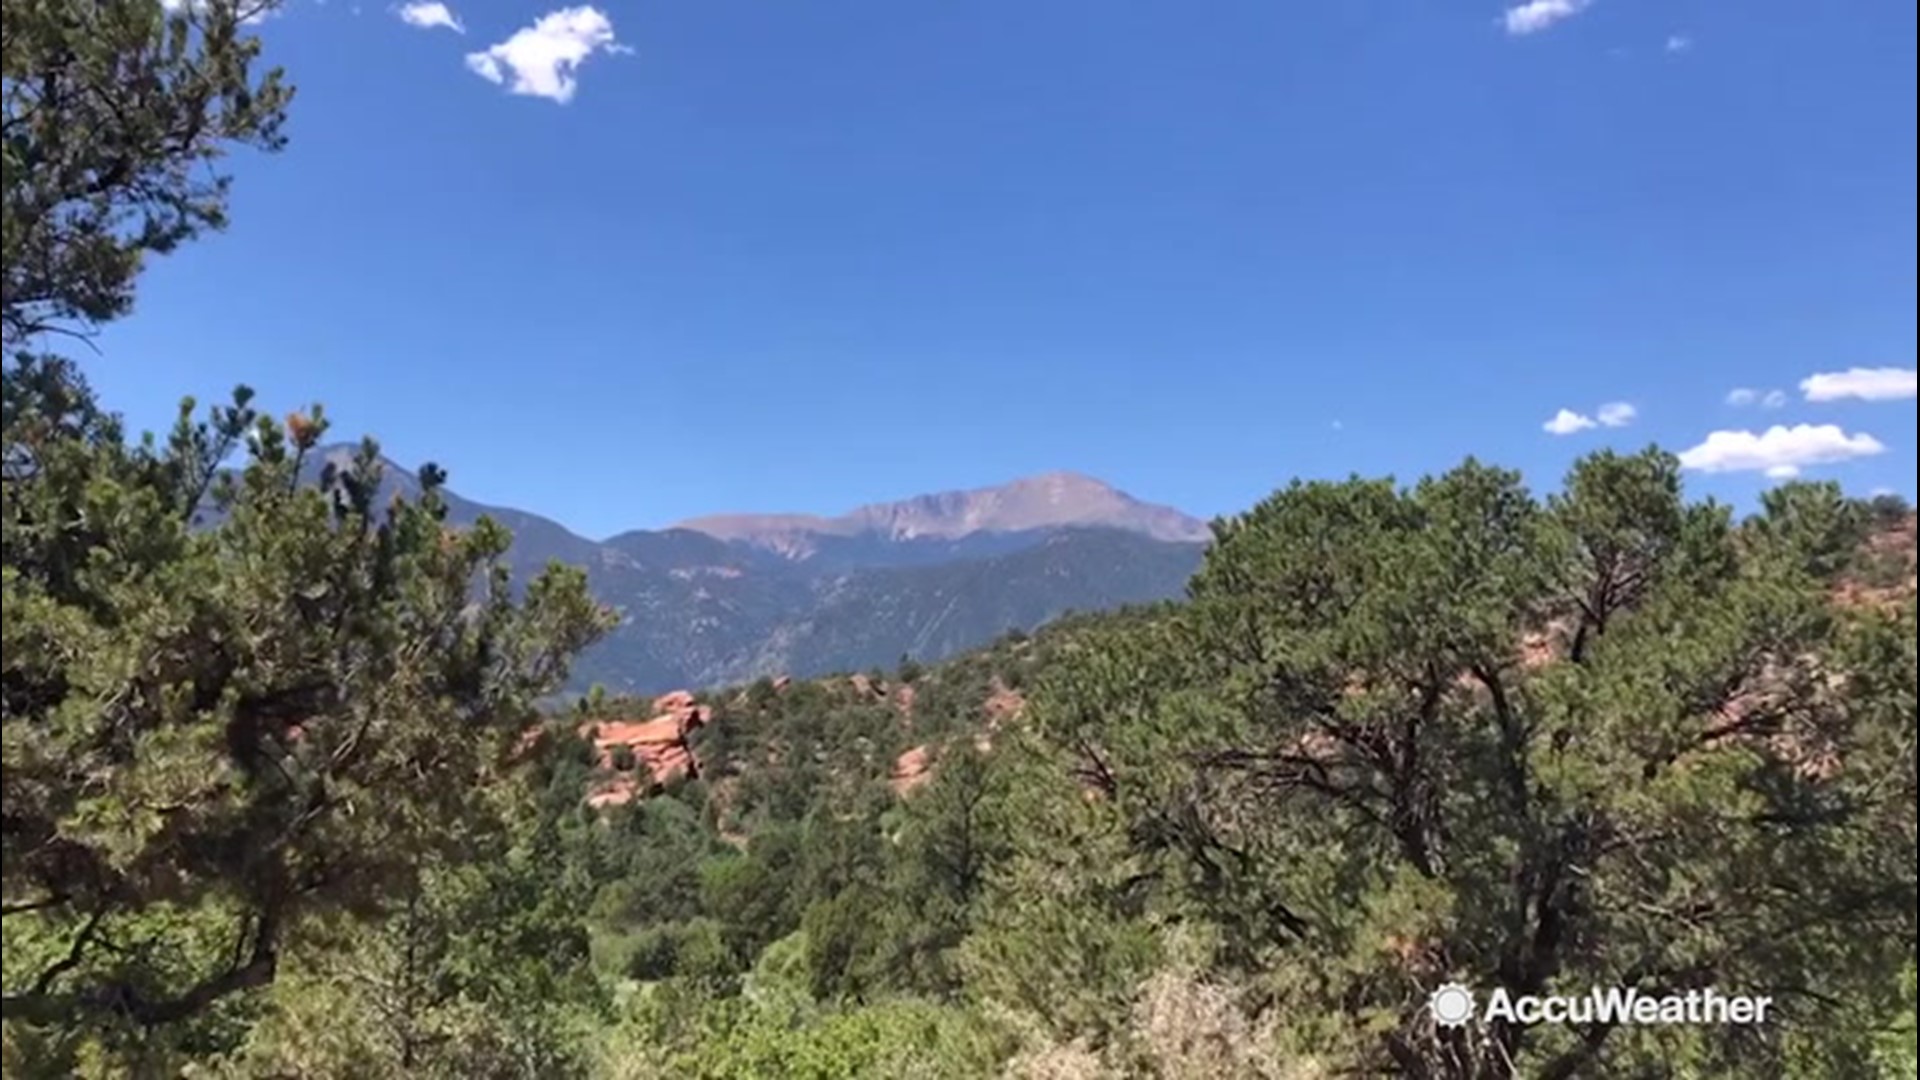 Colorado Springs, Colorado, is home to the beautiful Garden of the Gods, a 1,300 acre public park known for its incredible sandstone formations. On Aug. 16 Reed Timmer traveled there to take in the natural beauty of the park on an equally beautiful day.